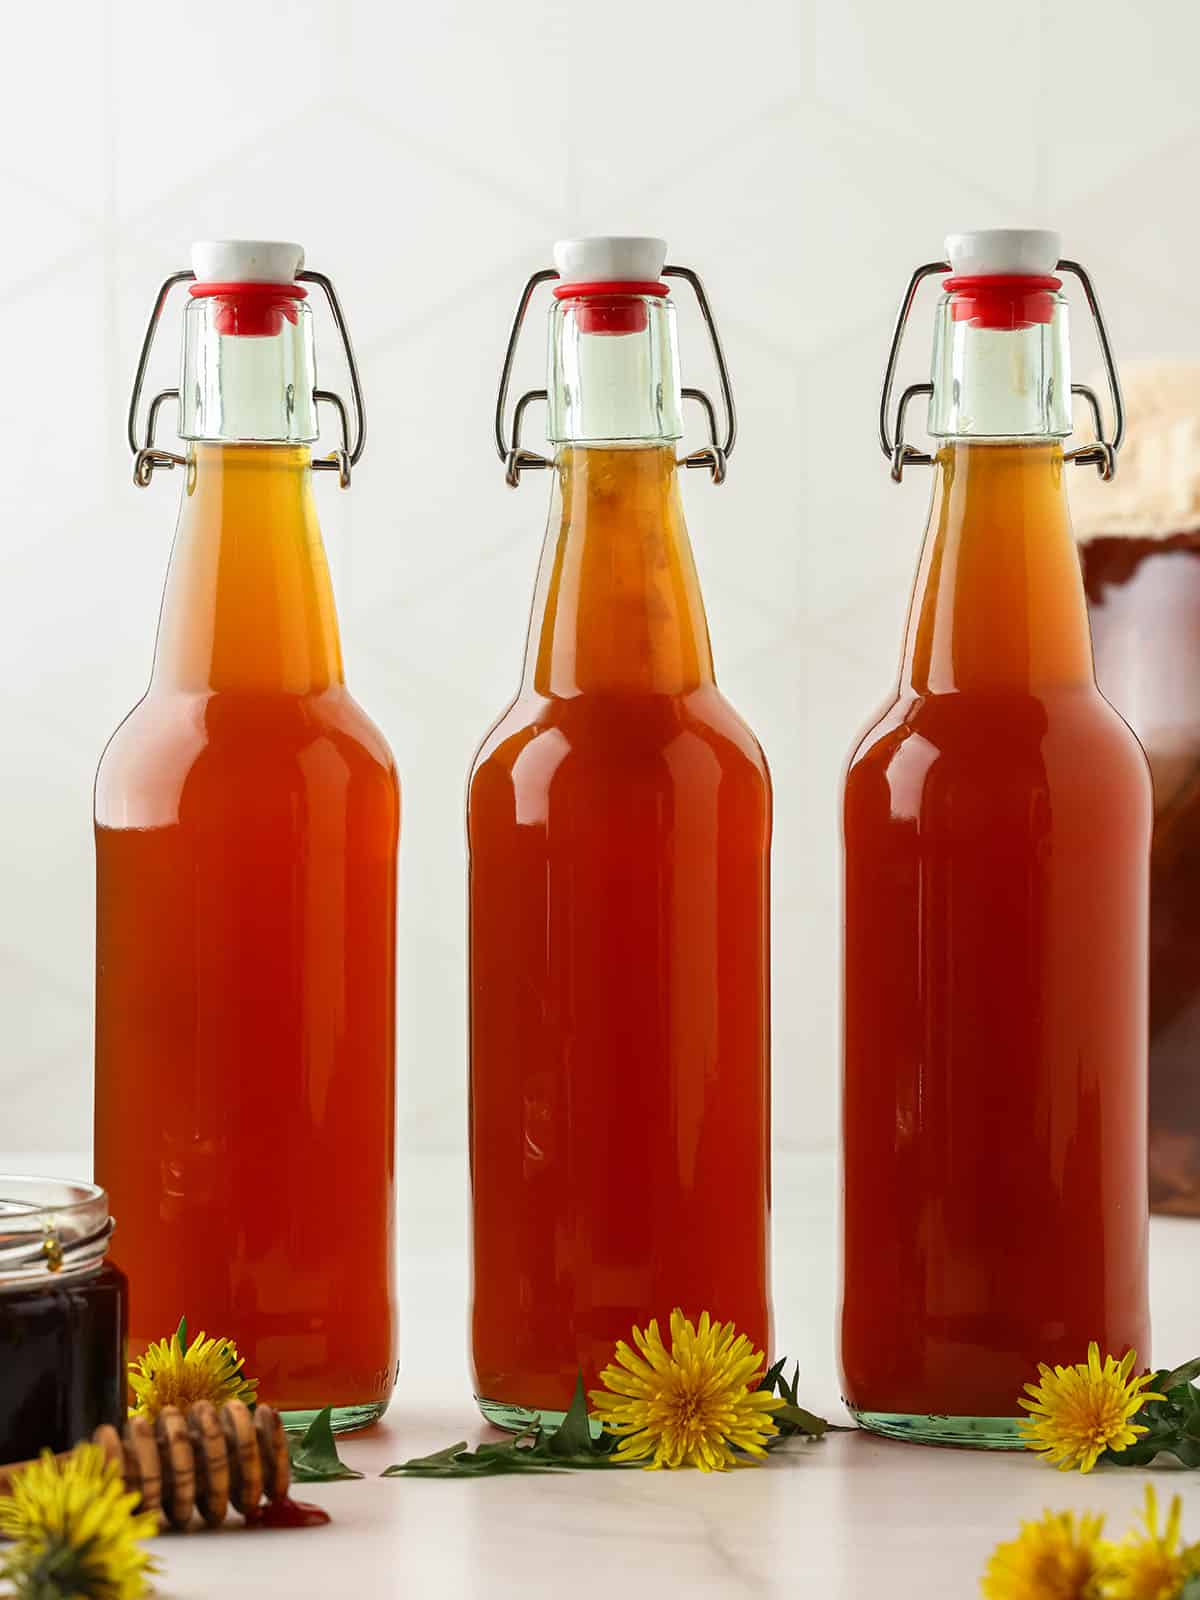 3 bottles of dandelion kombucha closed and ready for second fermentation, with fresh dandelions surrounding. 